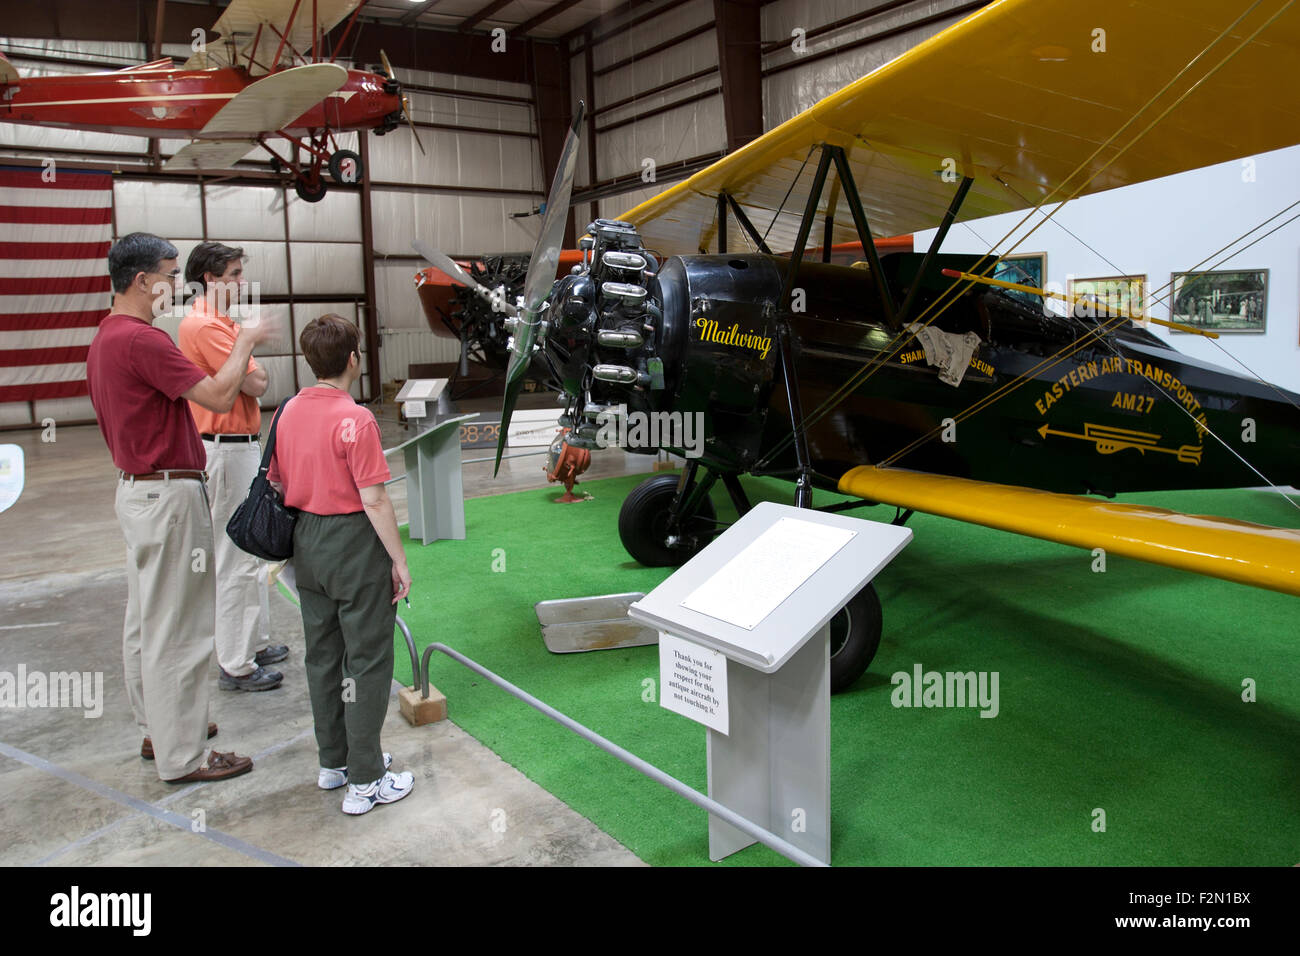 The Virginia Aviation Museum houses a variety of antique aircraft and aeronautical exhibits, Richmond, Virginia Stock Photo